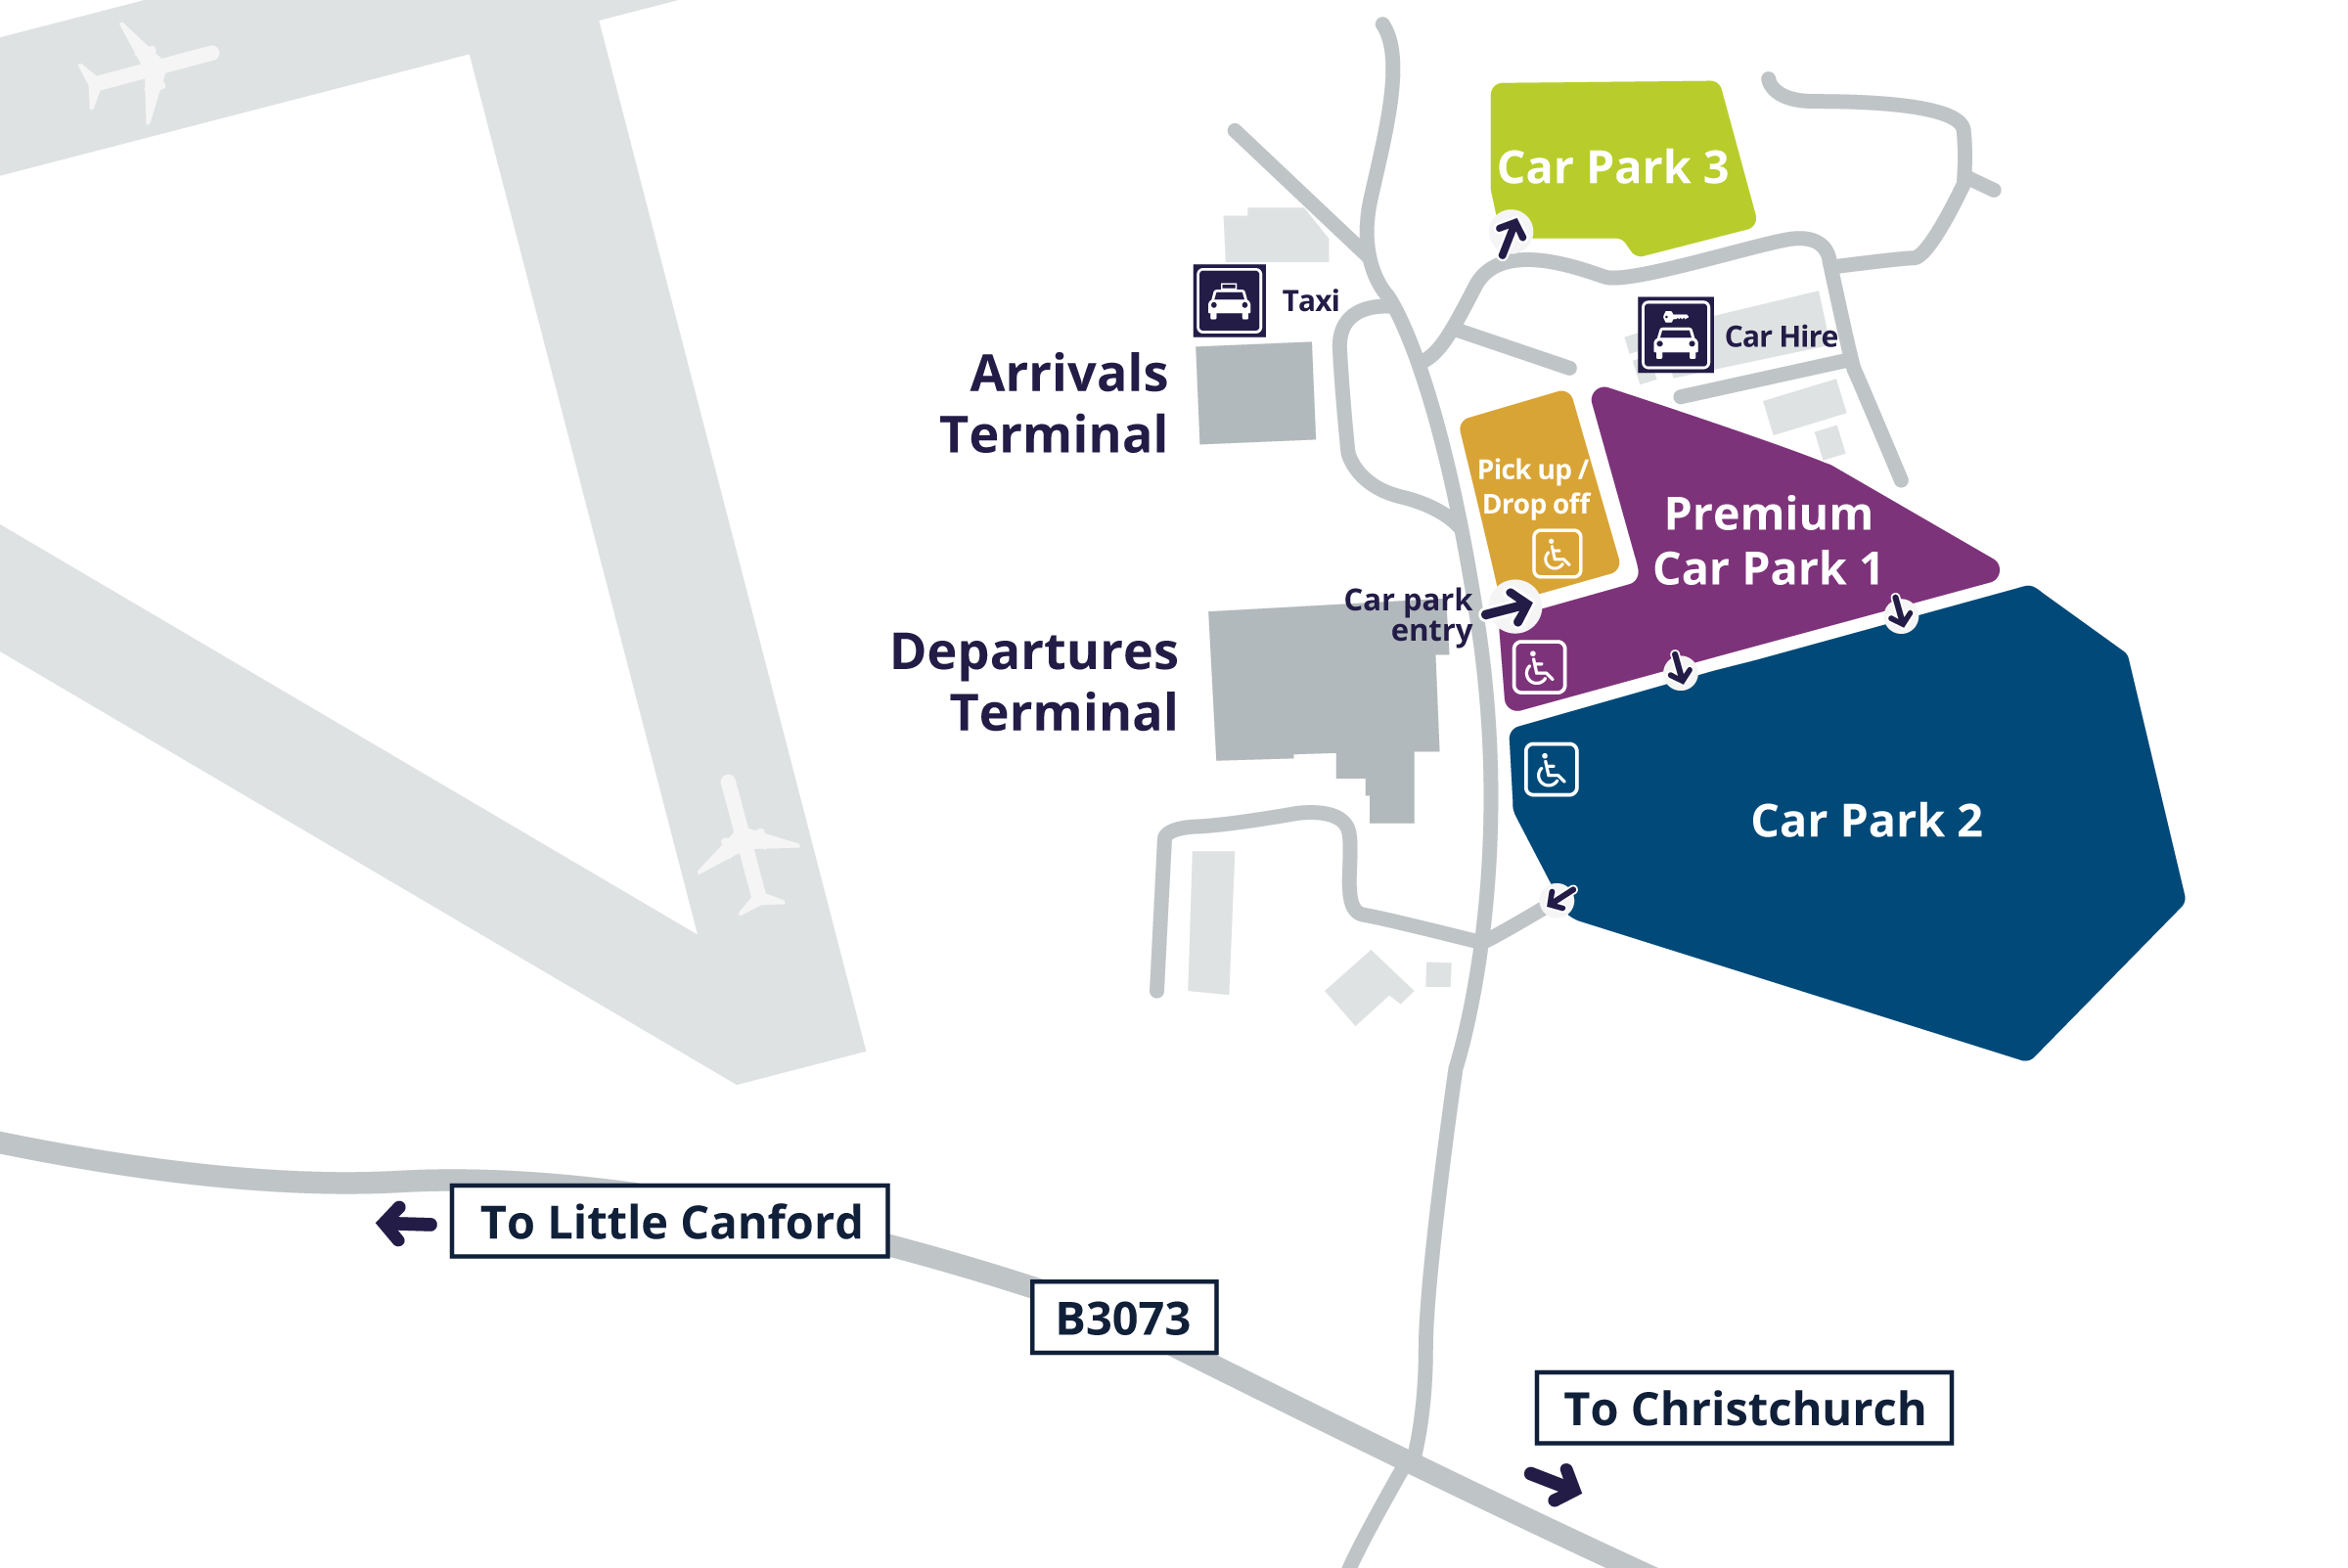 Bournemouth Airport Parking